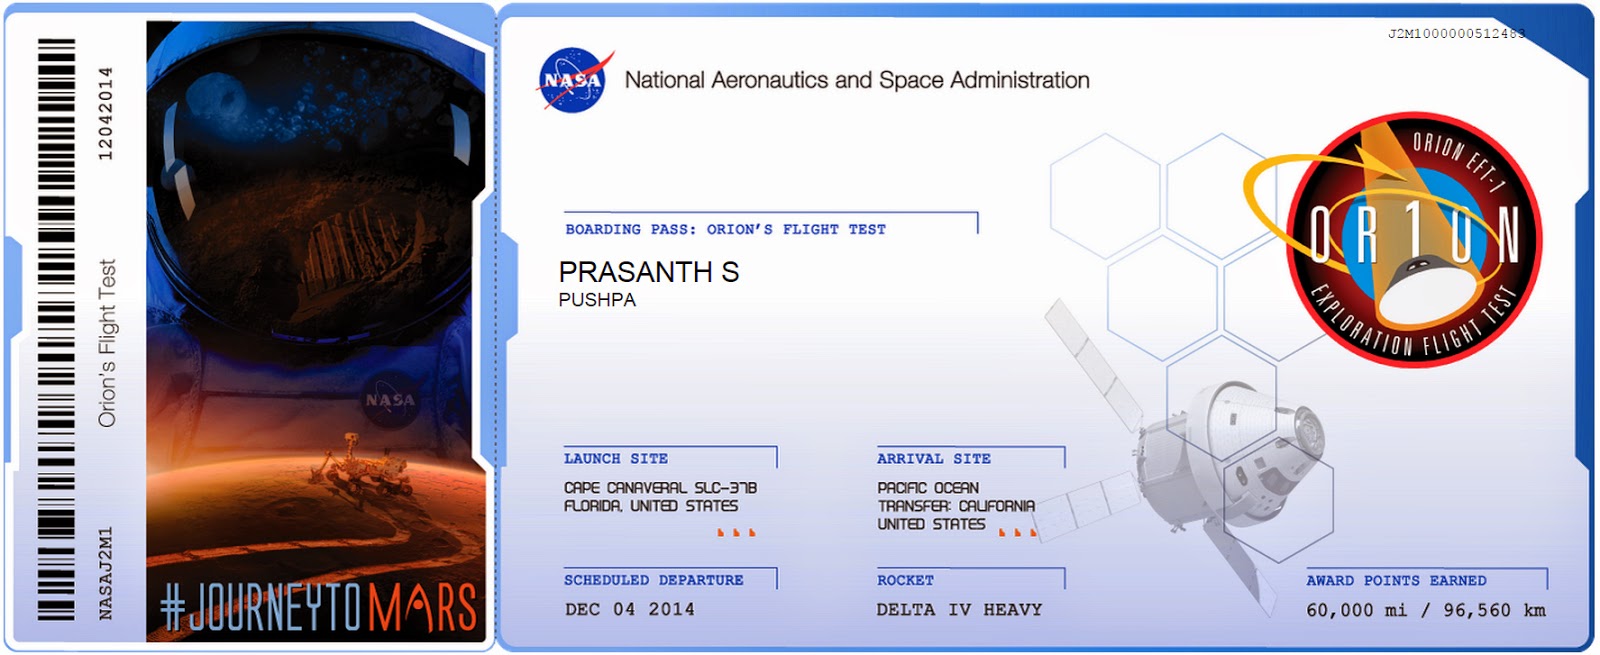 Send Your Name on NASA's Journey to Mars